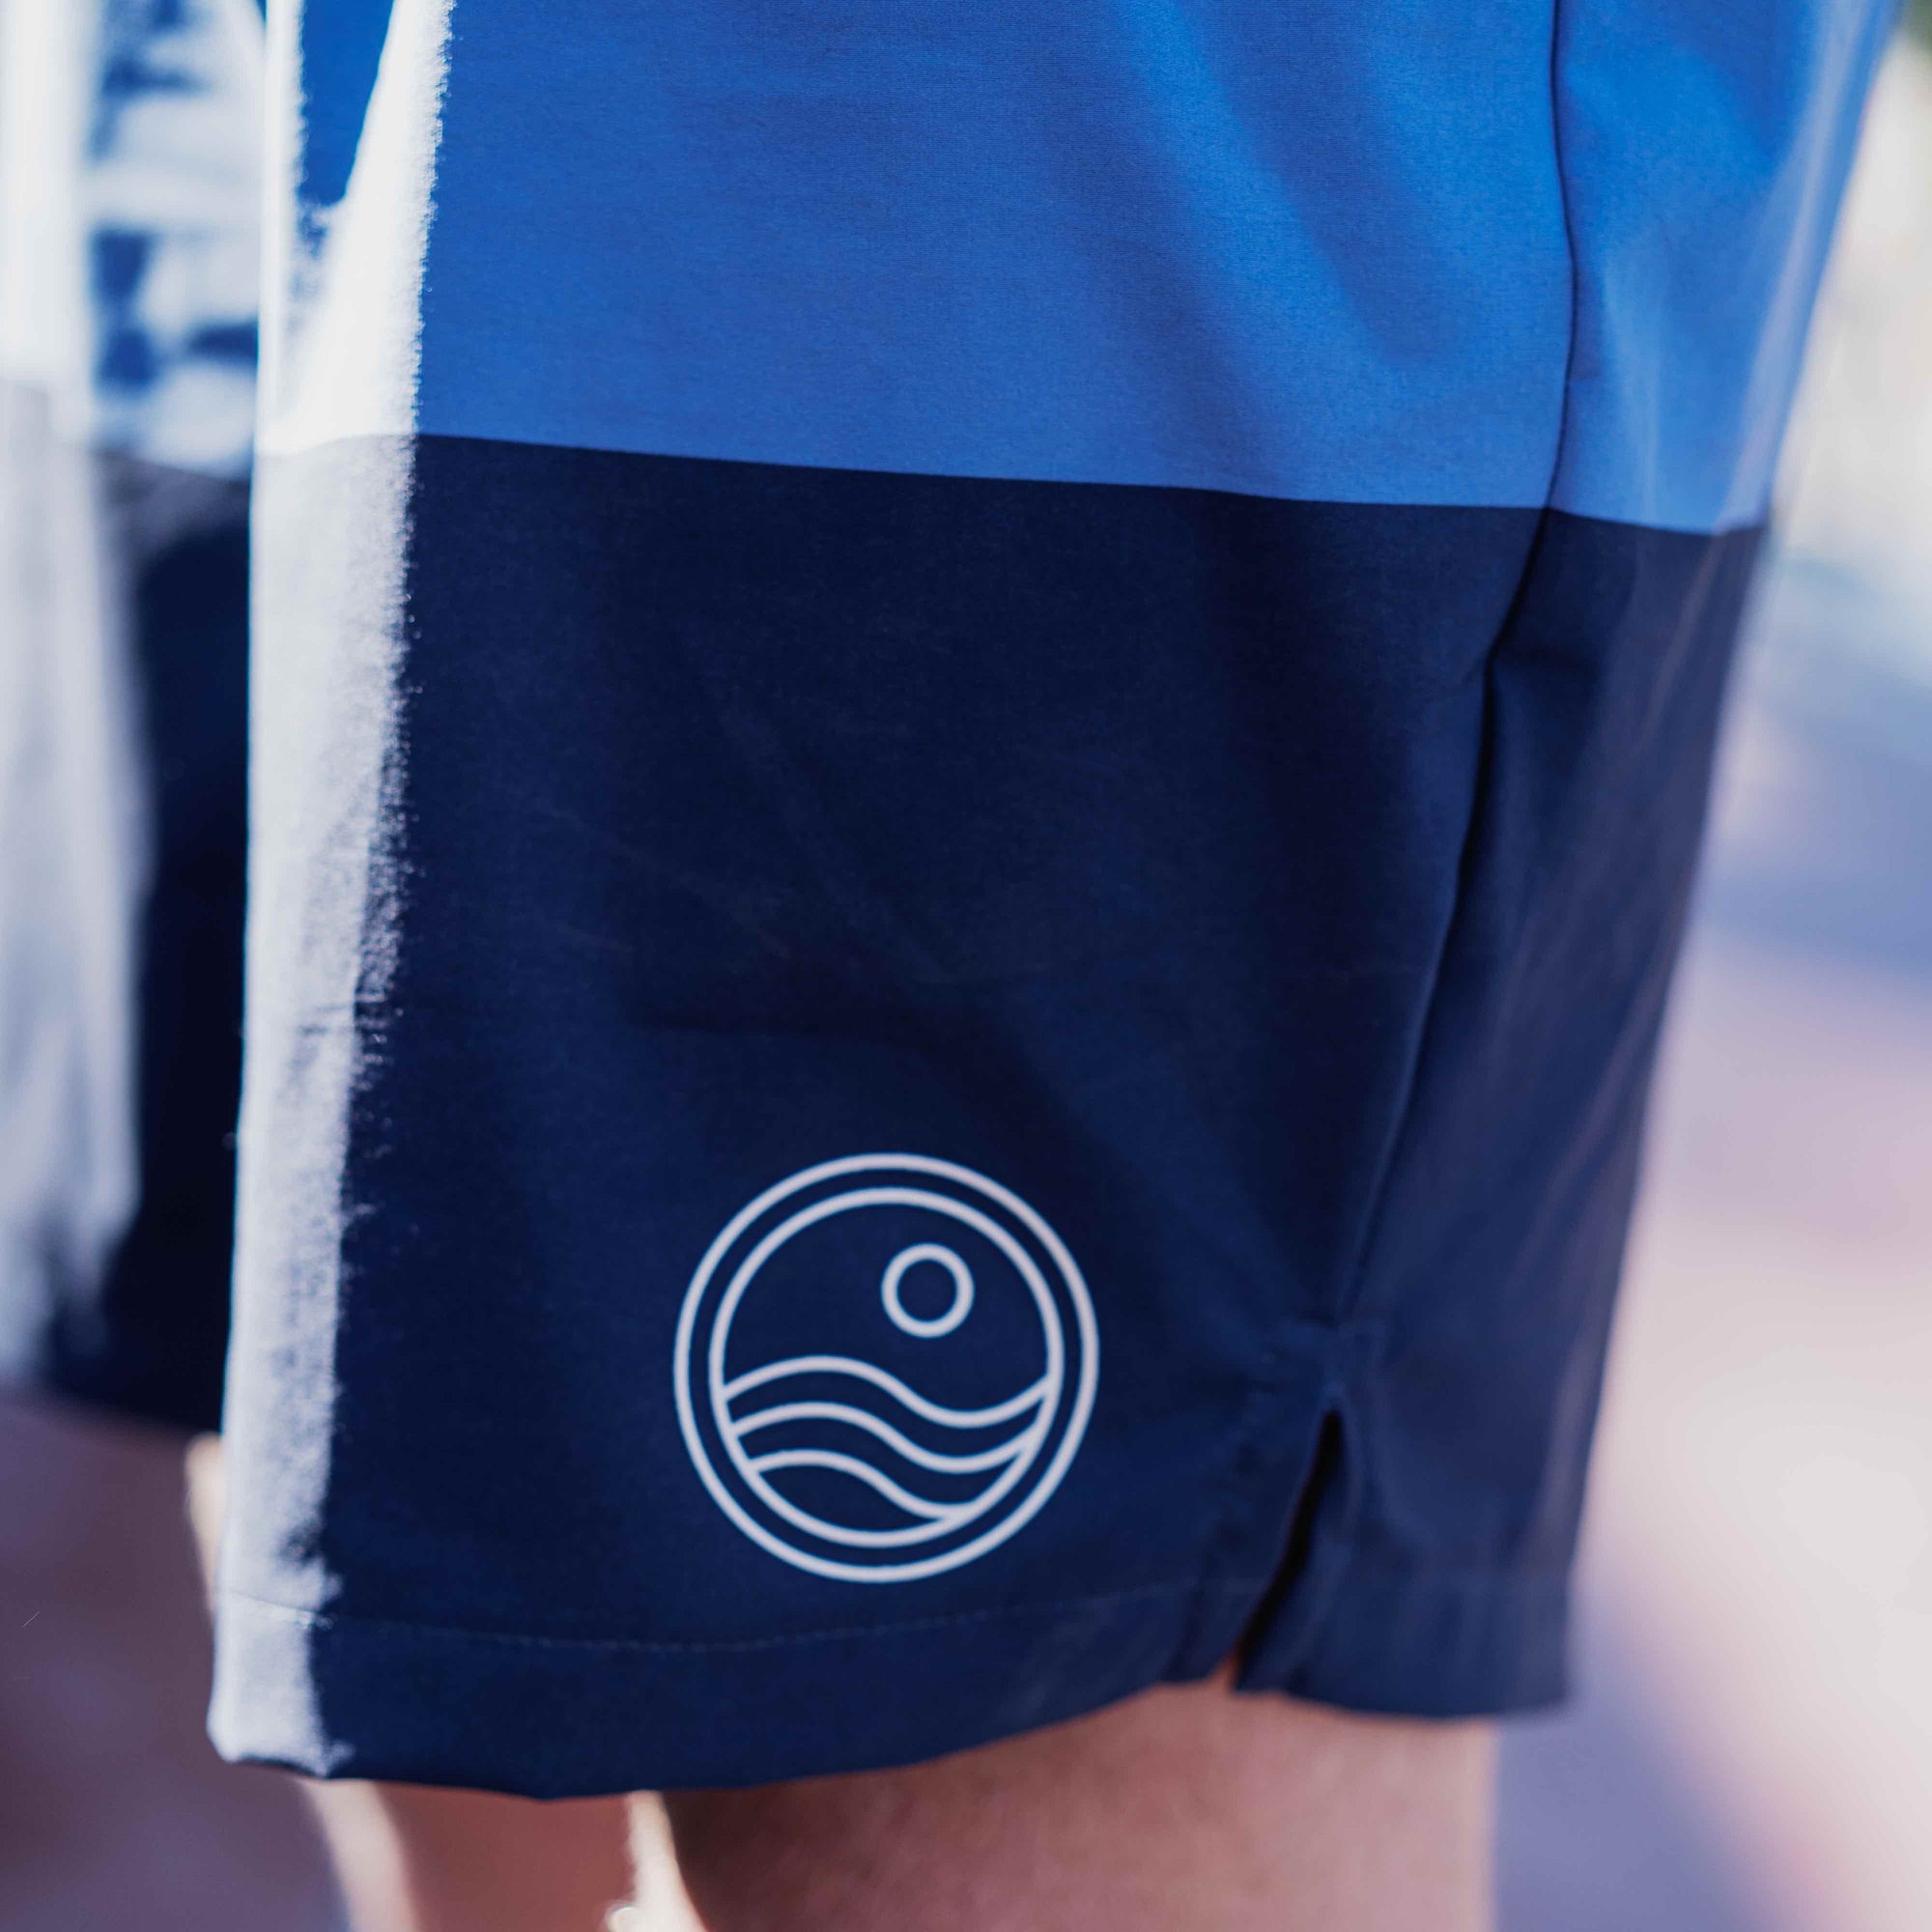 Men's Ultimate Shorts - Two-toned Blue - That Triathlon Life